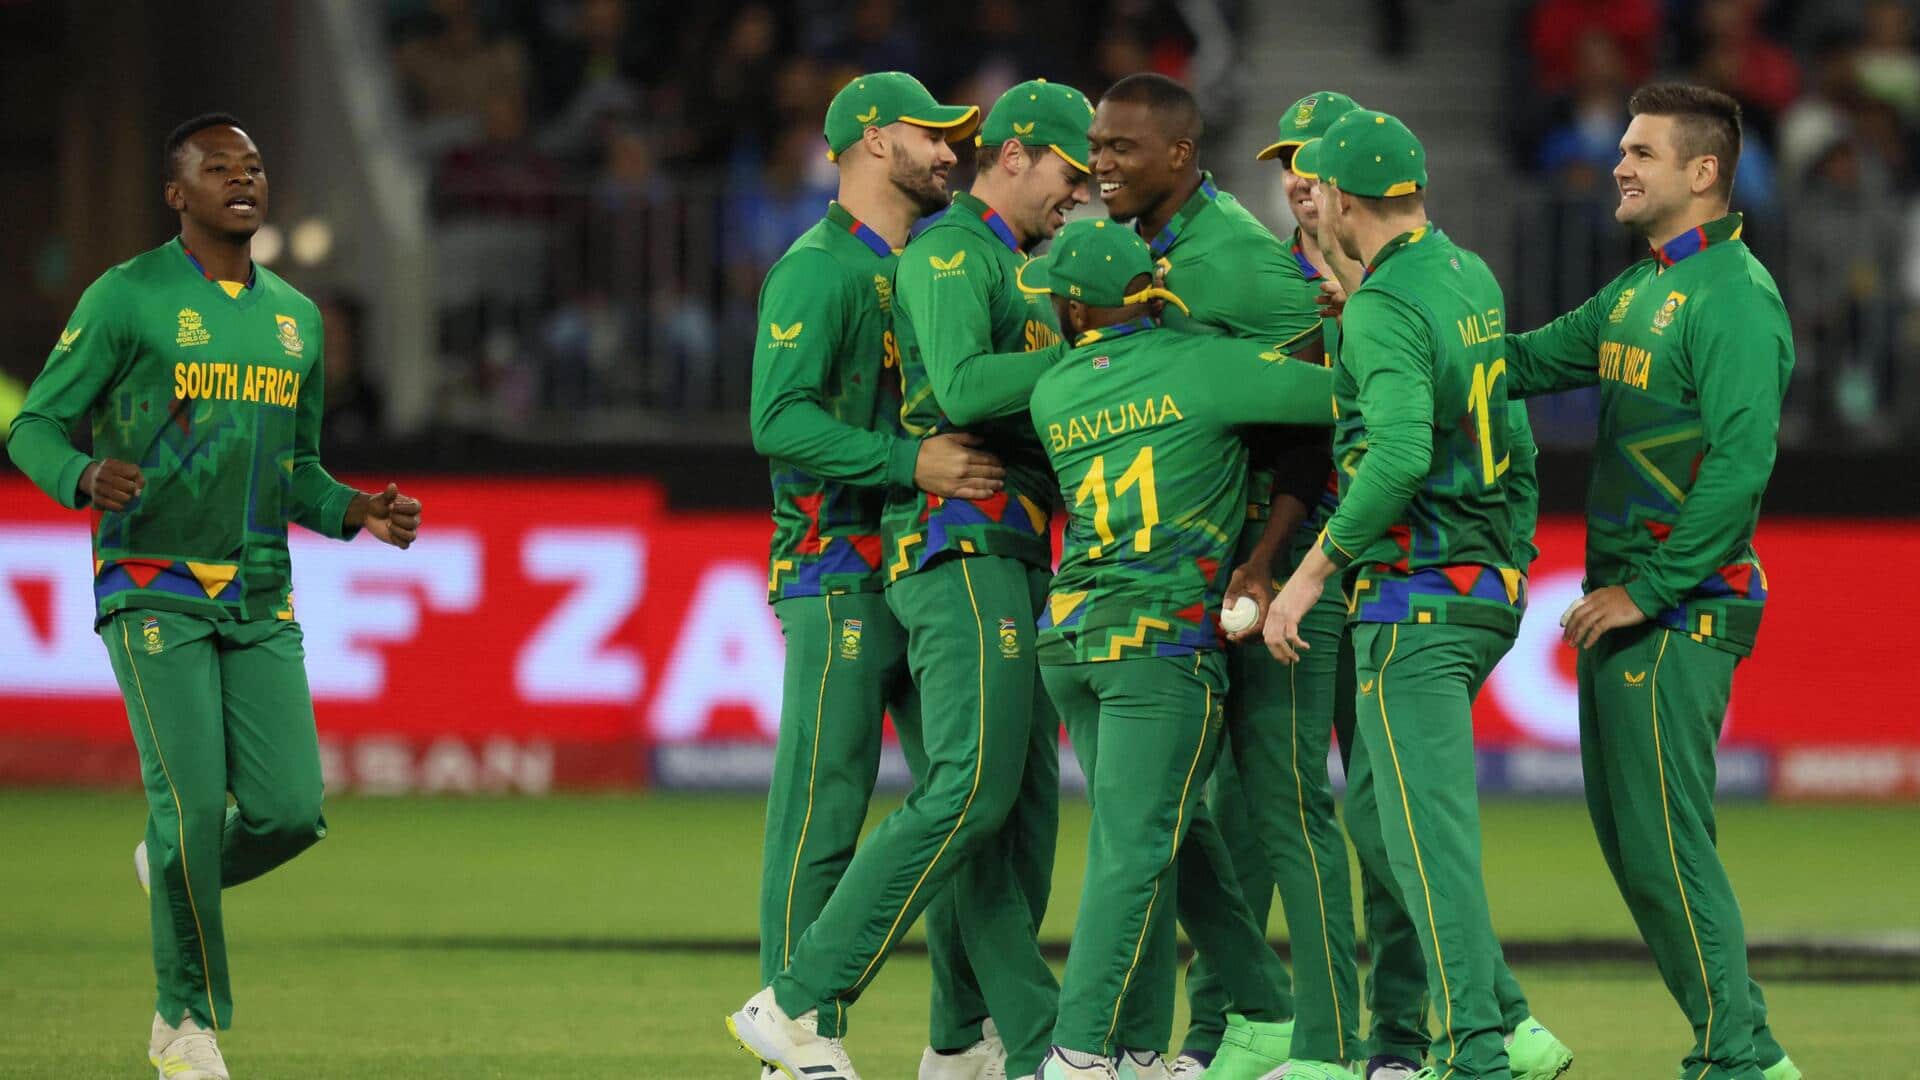 Teams with multiple 200-plus totals in ICC T20 World Cups